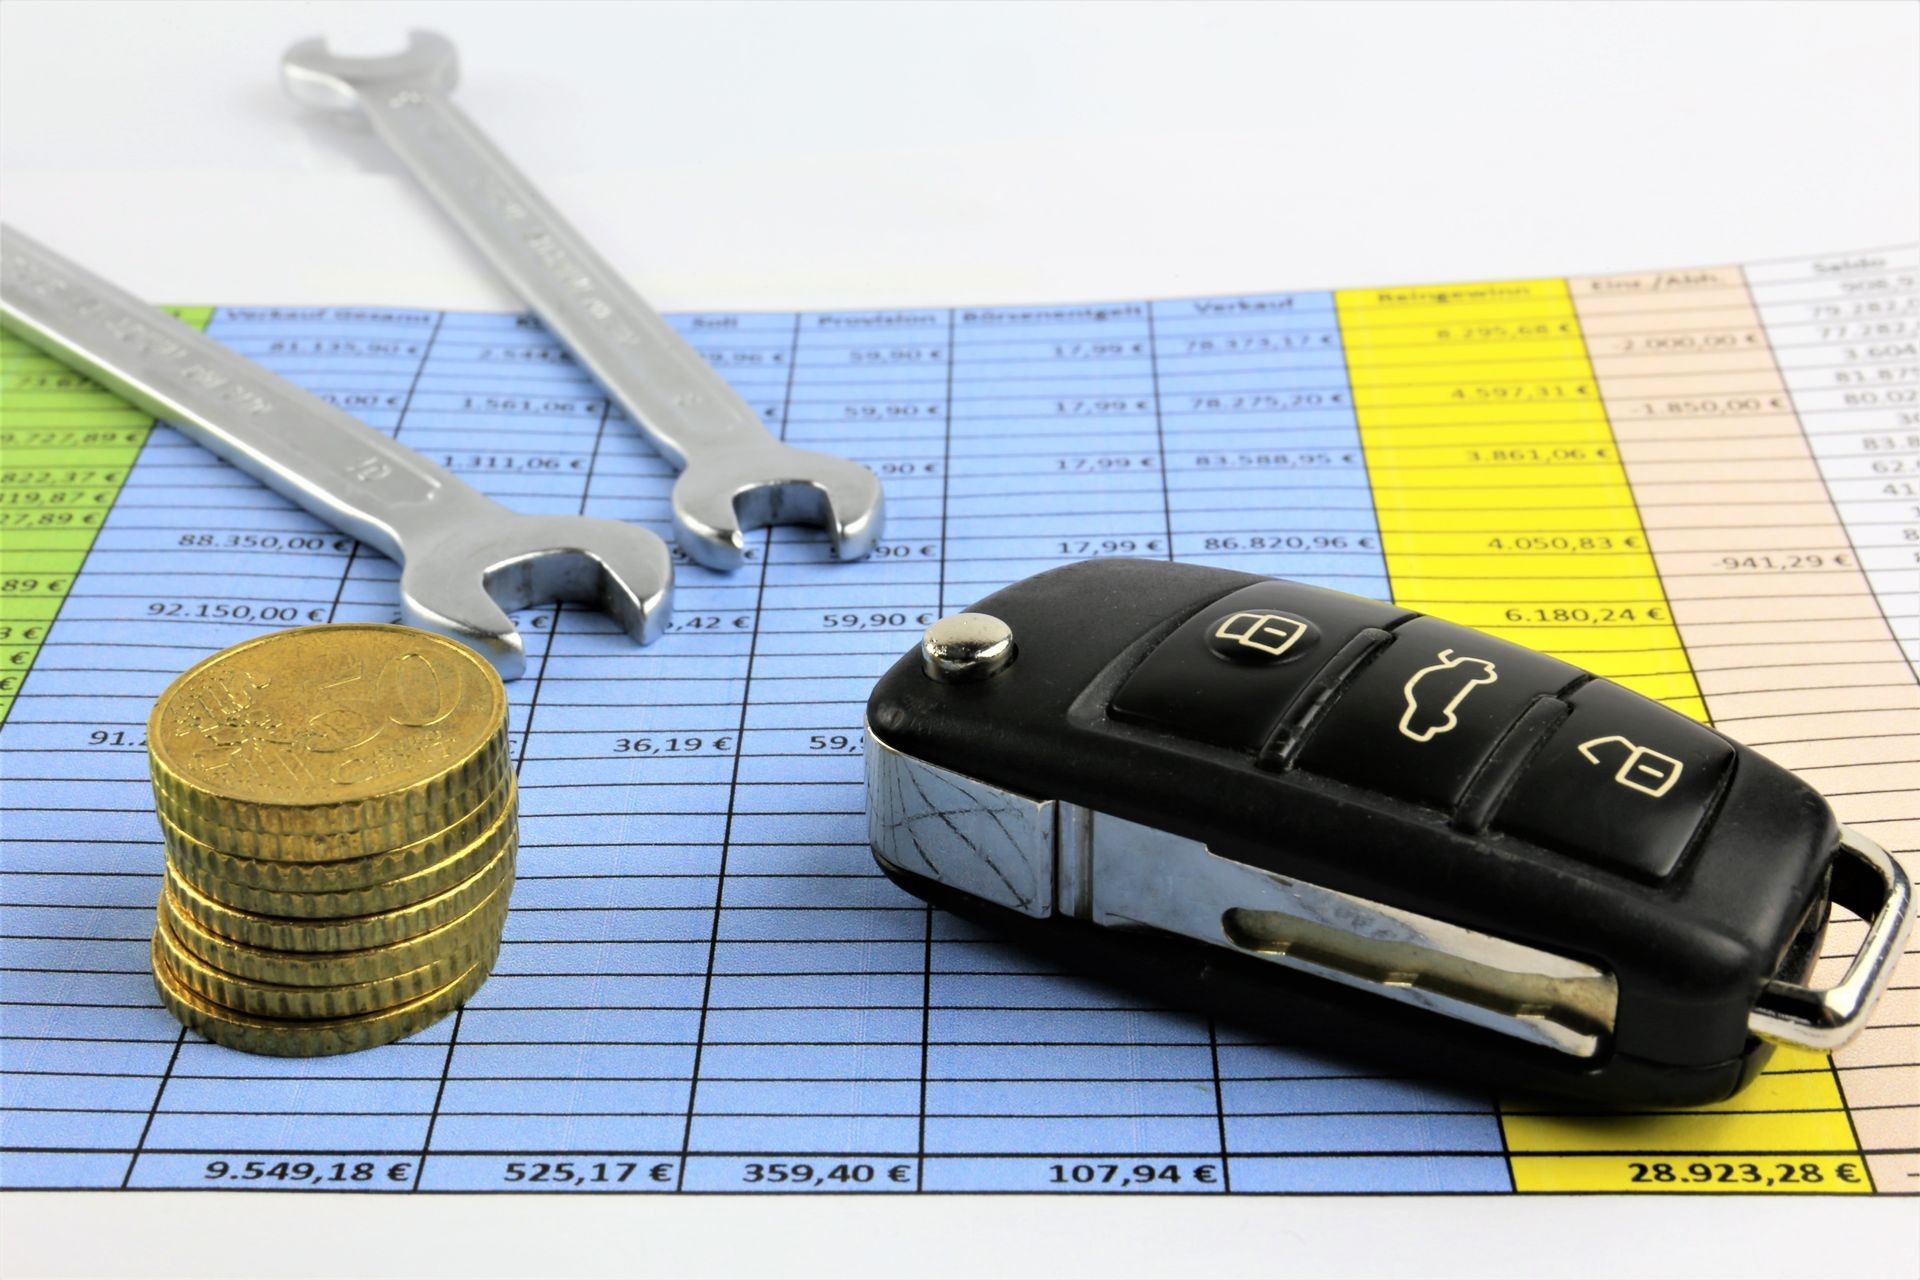 An concept Image of car maintenance costs - repair costs